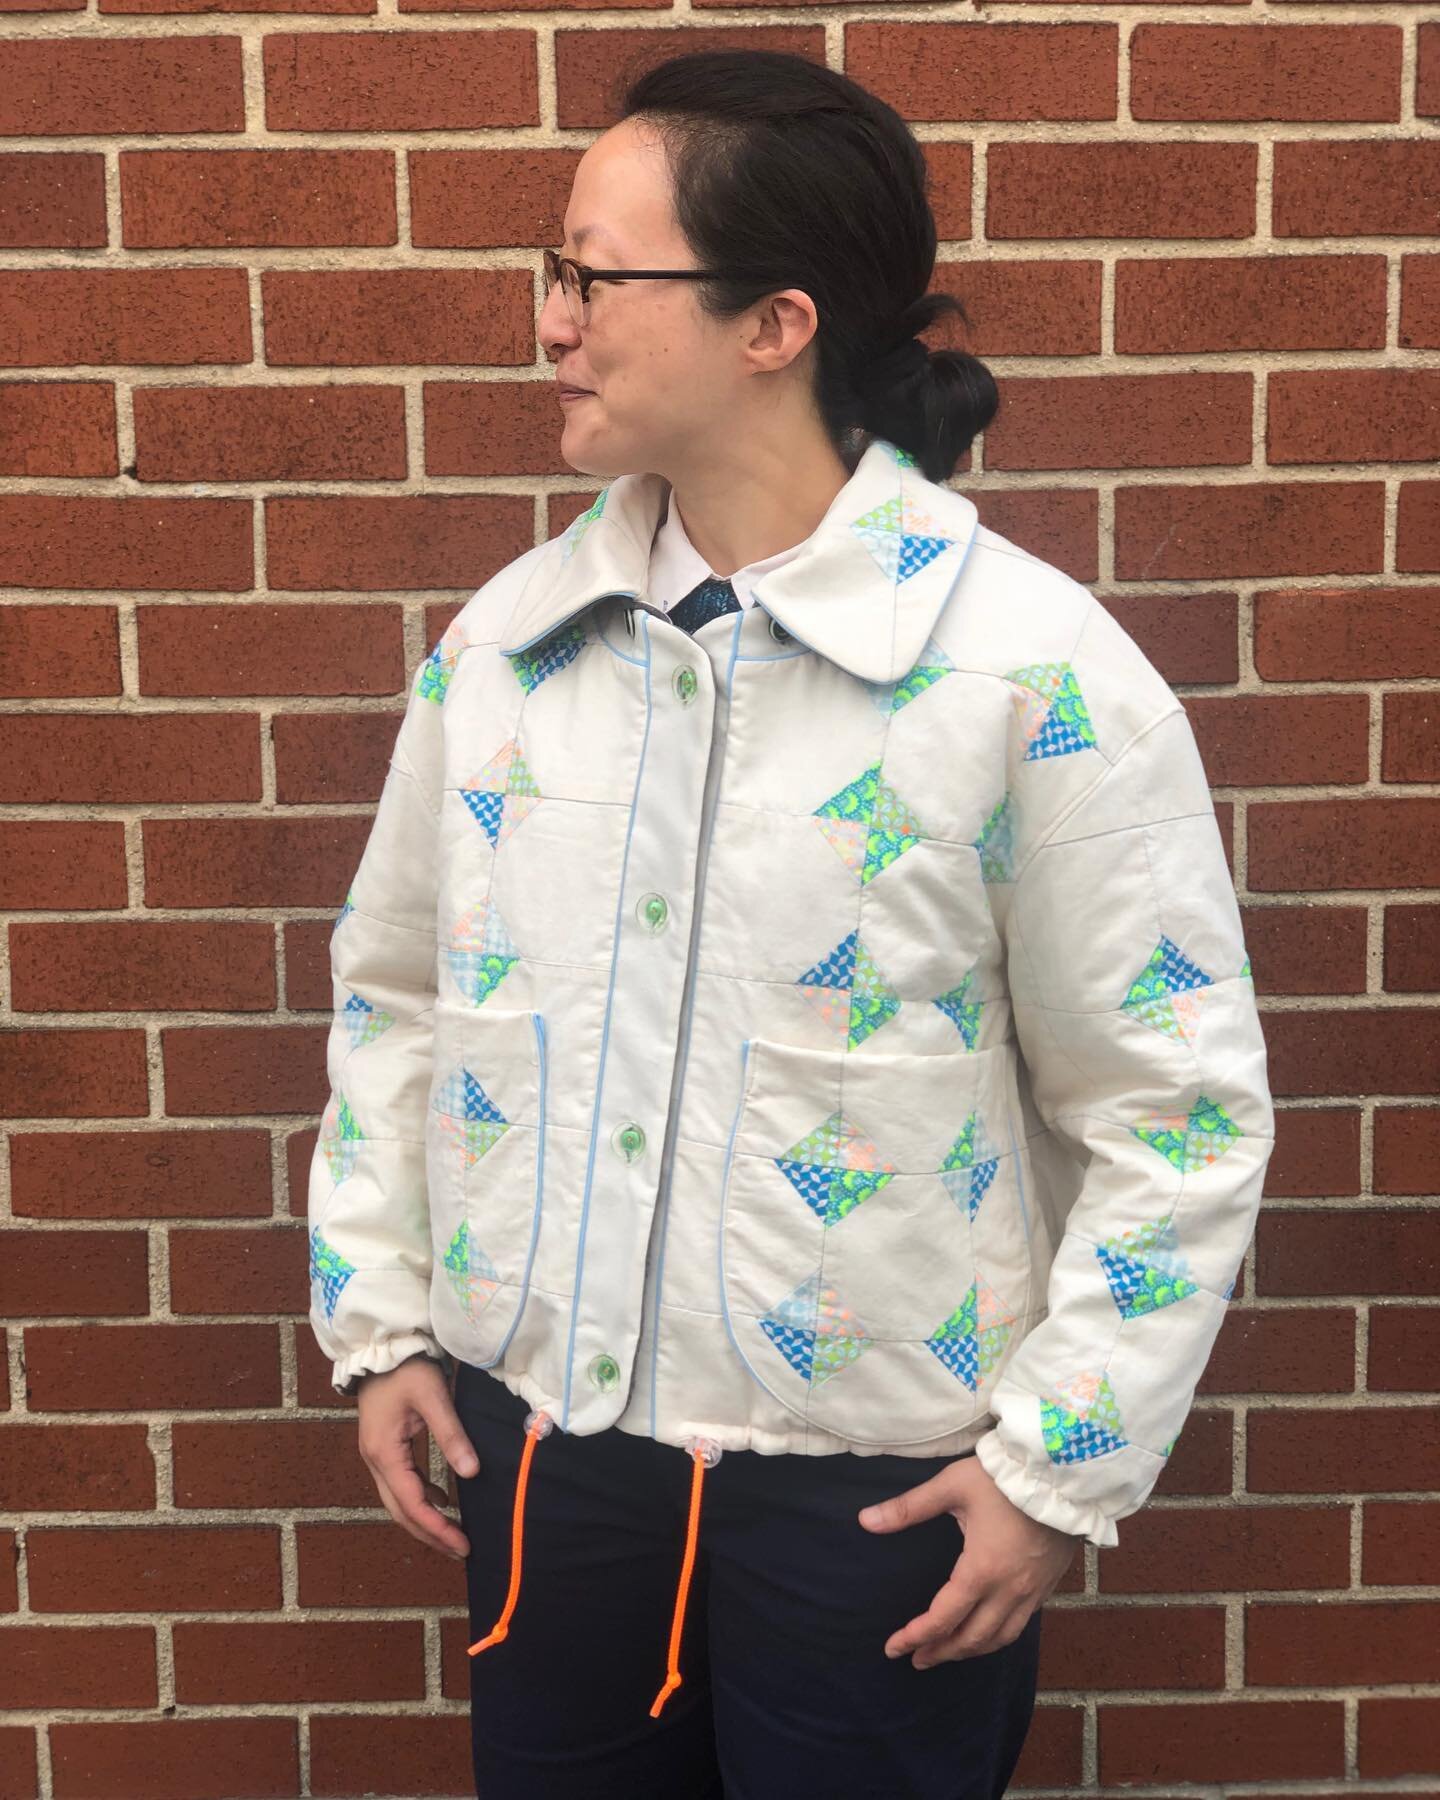 Here is my latest sewing project - the Papercut Emmi Jacket! I made my own patchwork for one side of this reversible jacket, using some fabric that I picked up on a trip to Paris. This project took me about two months to complete, but I really enjoye